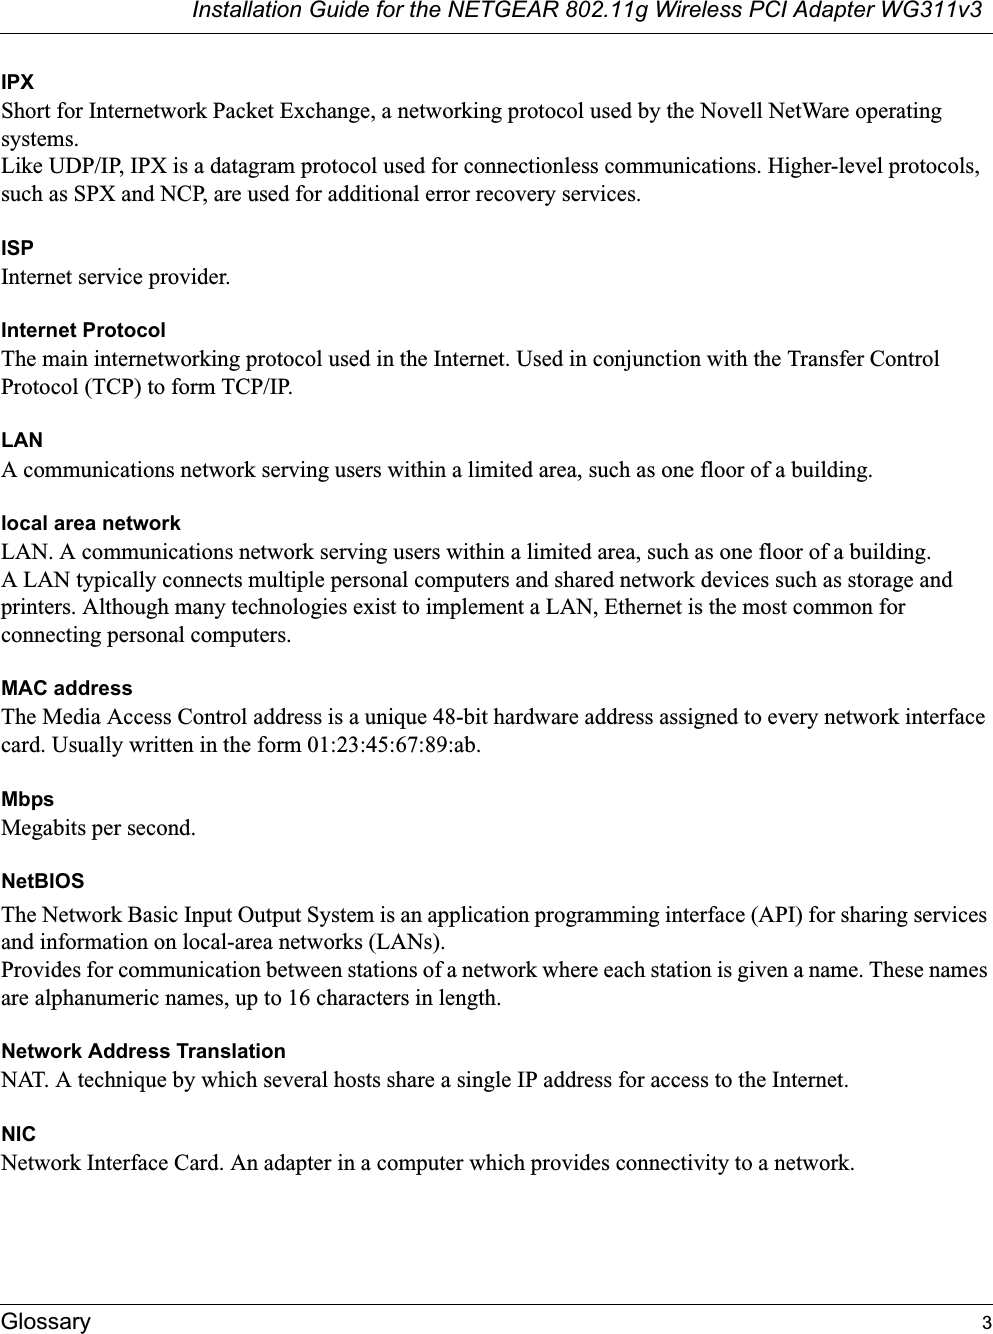 Installation Guide for the NETGEAR 802.11g Wireless PCI Adapter WG311v3Glossary 3IPXShort for Internetwork Packet Exchange, a networking protocol used by the Novell NetWare operating systems. Like UDP/IP, IPX is a datagram protocol used for connectionless communications. Higher-level protocols, such as SPX and NCP, are used for additional error recovery services. ISPInternet service provider.Internet ProtocolThe main internetworking protocol used in the Internet. Used in conjunction with the Transfer Control Protocol (TCP) to form TCP/IP.LANA communications network serving users within a limited area, such as one floor of a building.local area networkLAN. A communications network serving users within a limited area, such as one floor of a building. A LAN typically connects multiple personal computers and shared network devices such as storage and printers. Although many technologies exist to implement a LAN, Ethernet is the most common for connecting personal computers.MAC addressThe Media Access Control address is a unique 48-bit hardware address assigned to every network interface card. Usually written in the form 01:23:45:67:89:ab.MbpsMegabits per second.NetBIOSThe Network Basic Input Output System is an application programming interface (API) for sharing services and information on local-area networks (LANs). Provides for communication between stations of a network where each station is given a name. These names are alphanumeric names, up to 16 characters in length. Network Address TranslationNAT. A technique by which several hosts share a single IP address for access to the Internet.NICNetwork Interface Card. An adapter in a computer which provides connectivity to a network.